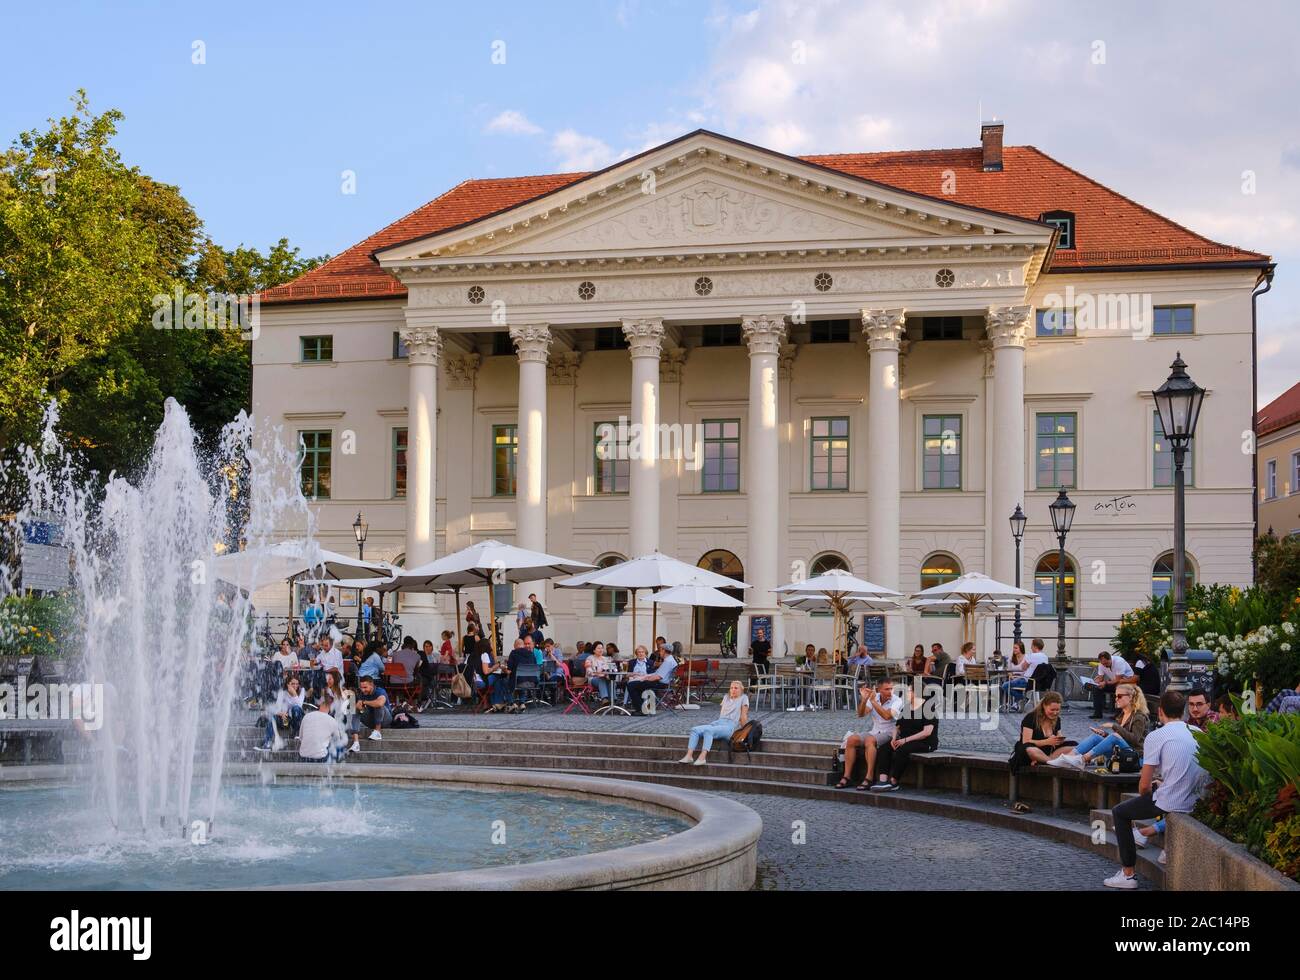 House of Music at the Presidential Palace at Bismarck sqaure, Regensburg, Upper Palatinate, Bavaria, Germany Stock Photo